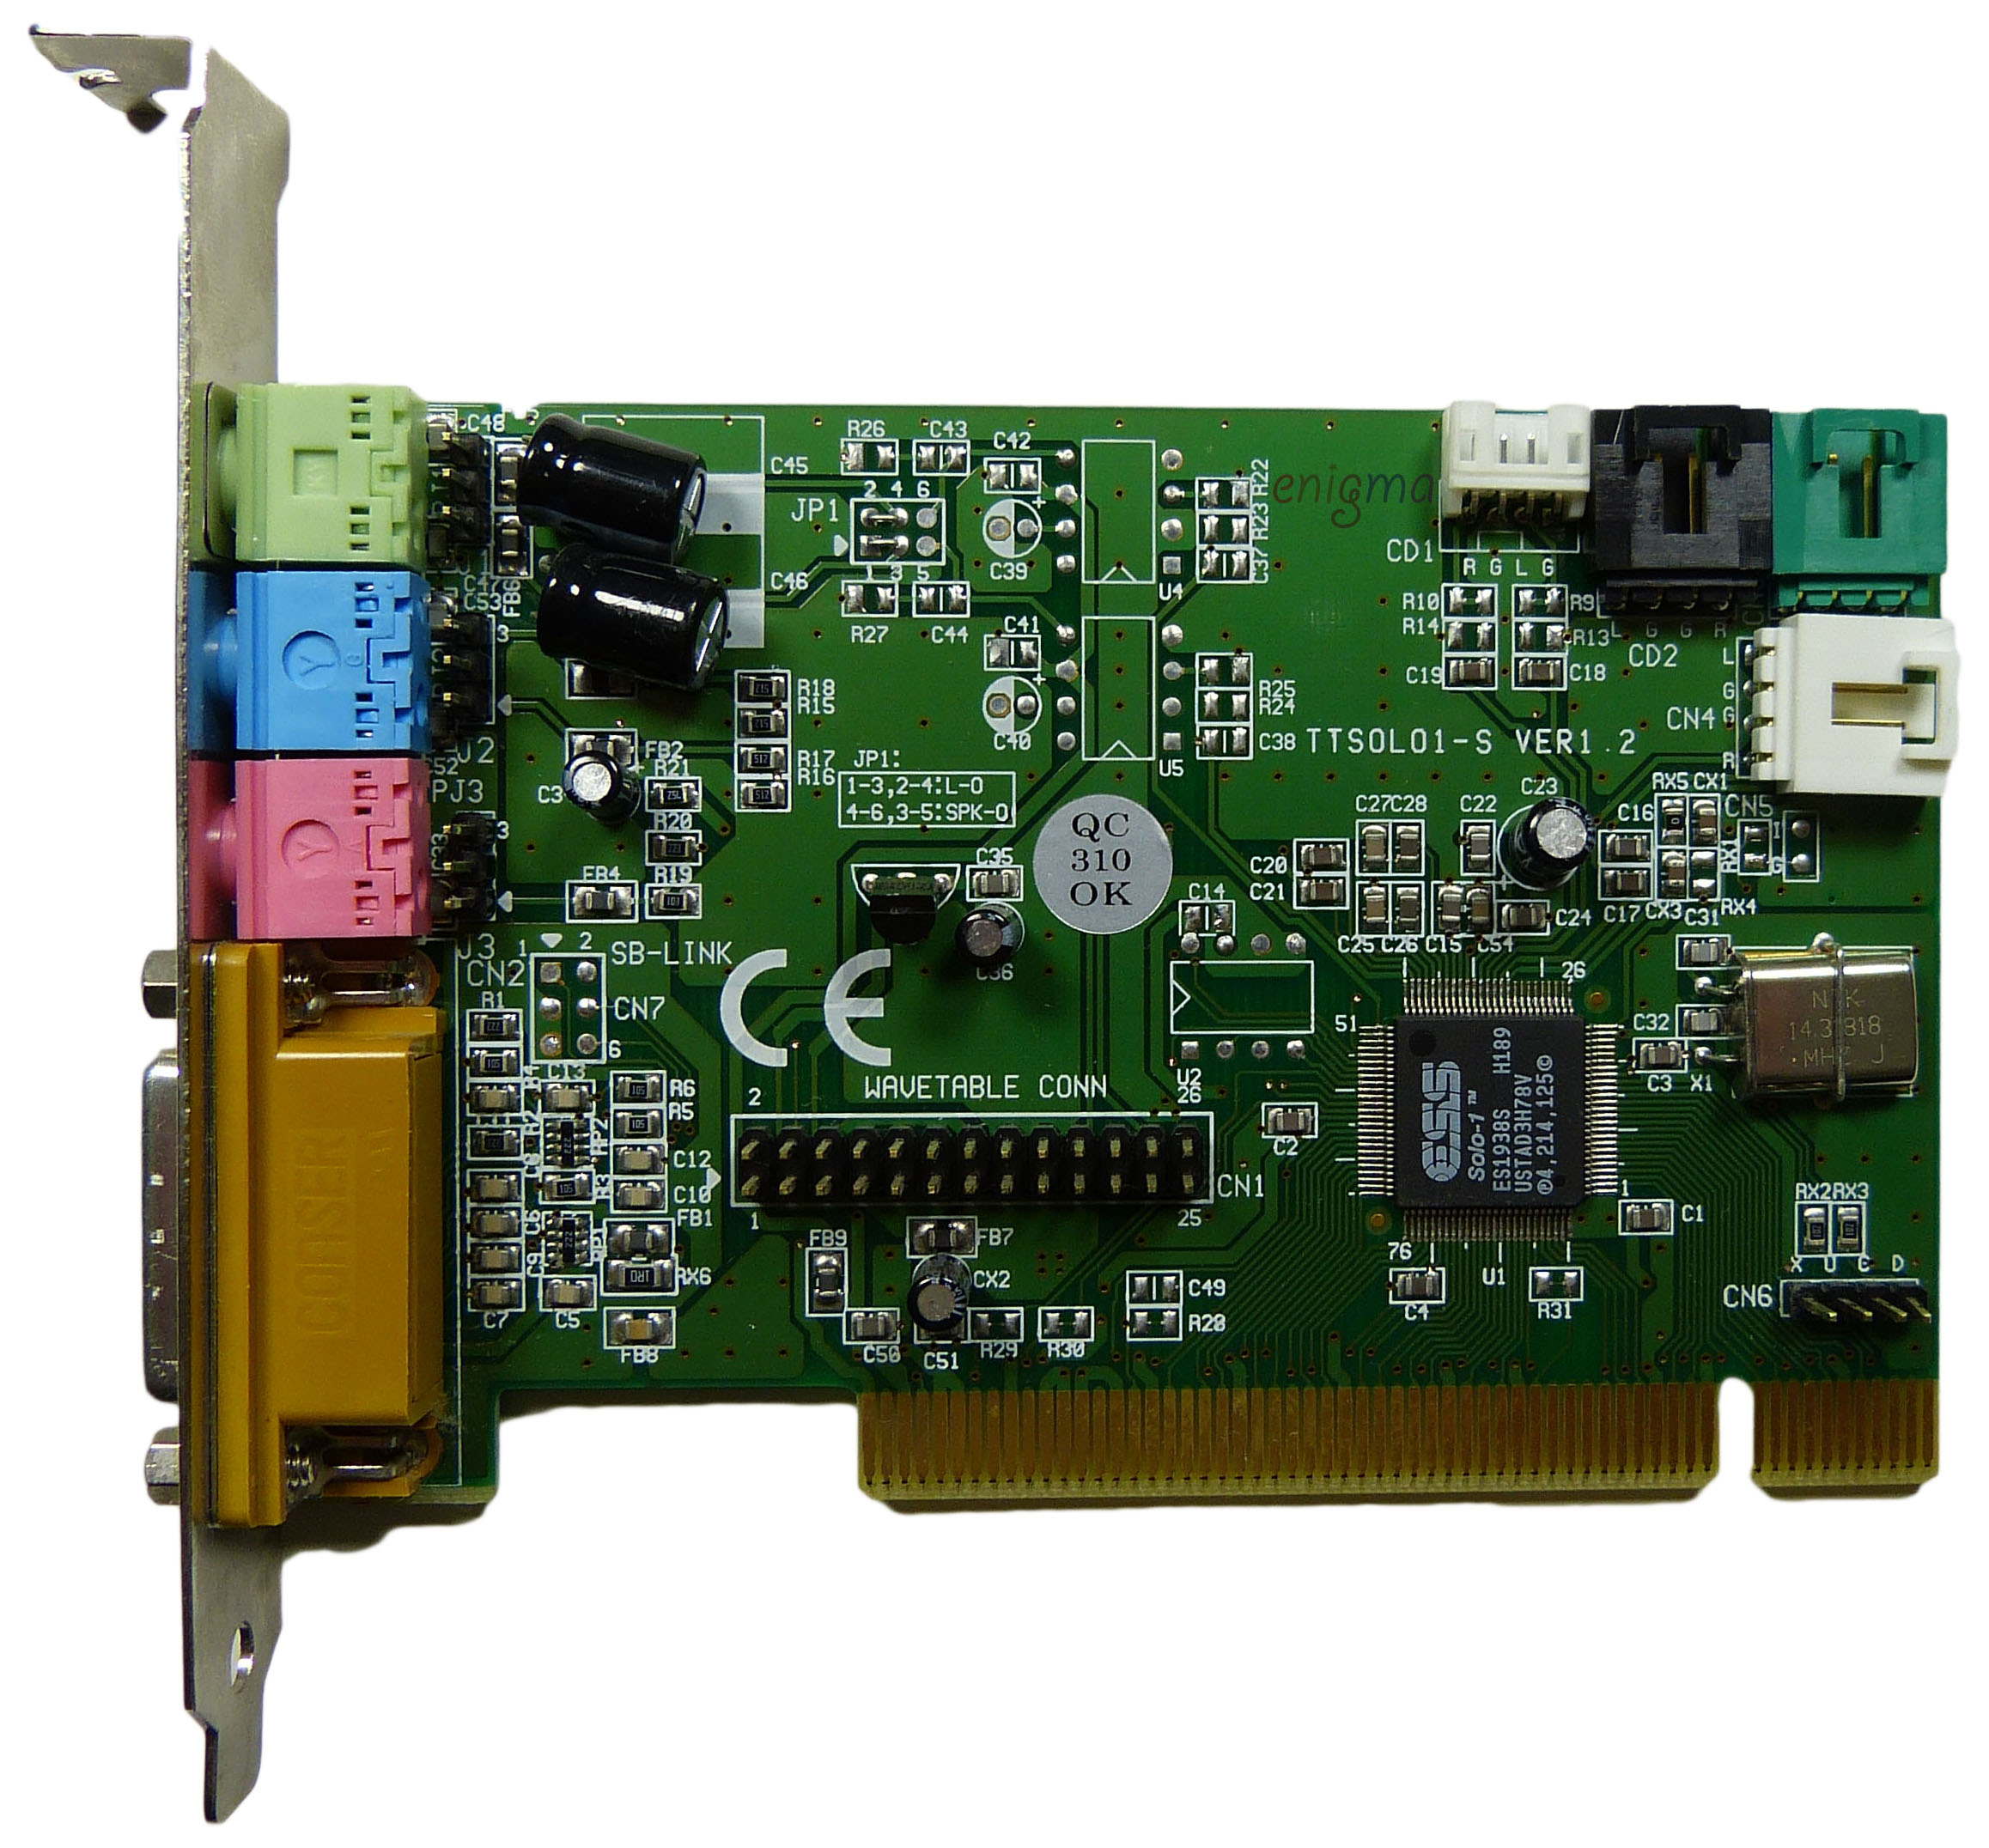 Ess solo 1 es1938s driver download sound card for windows 7